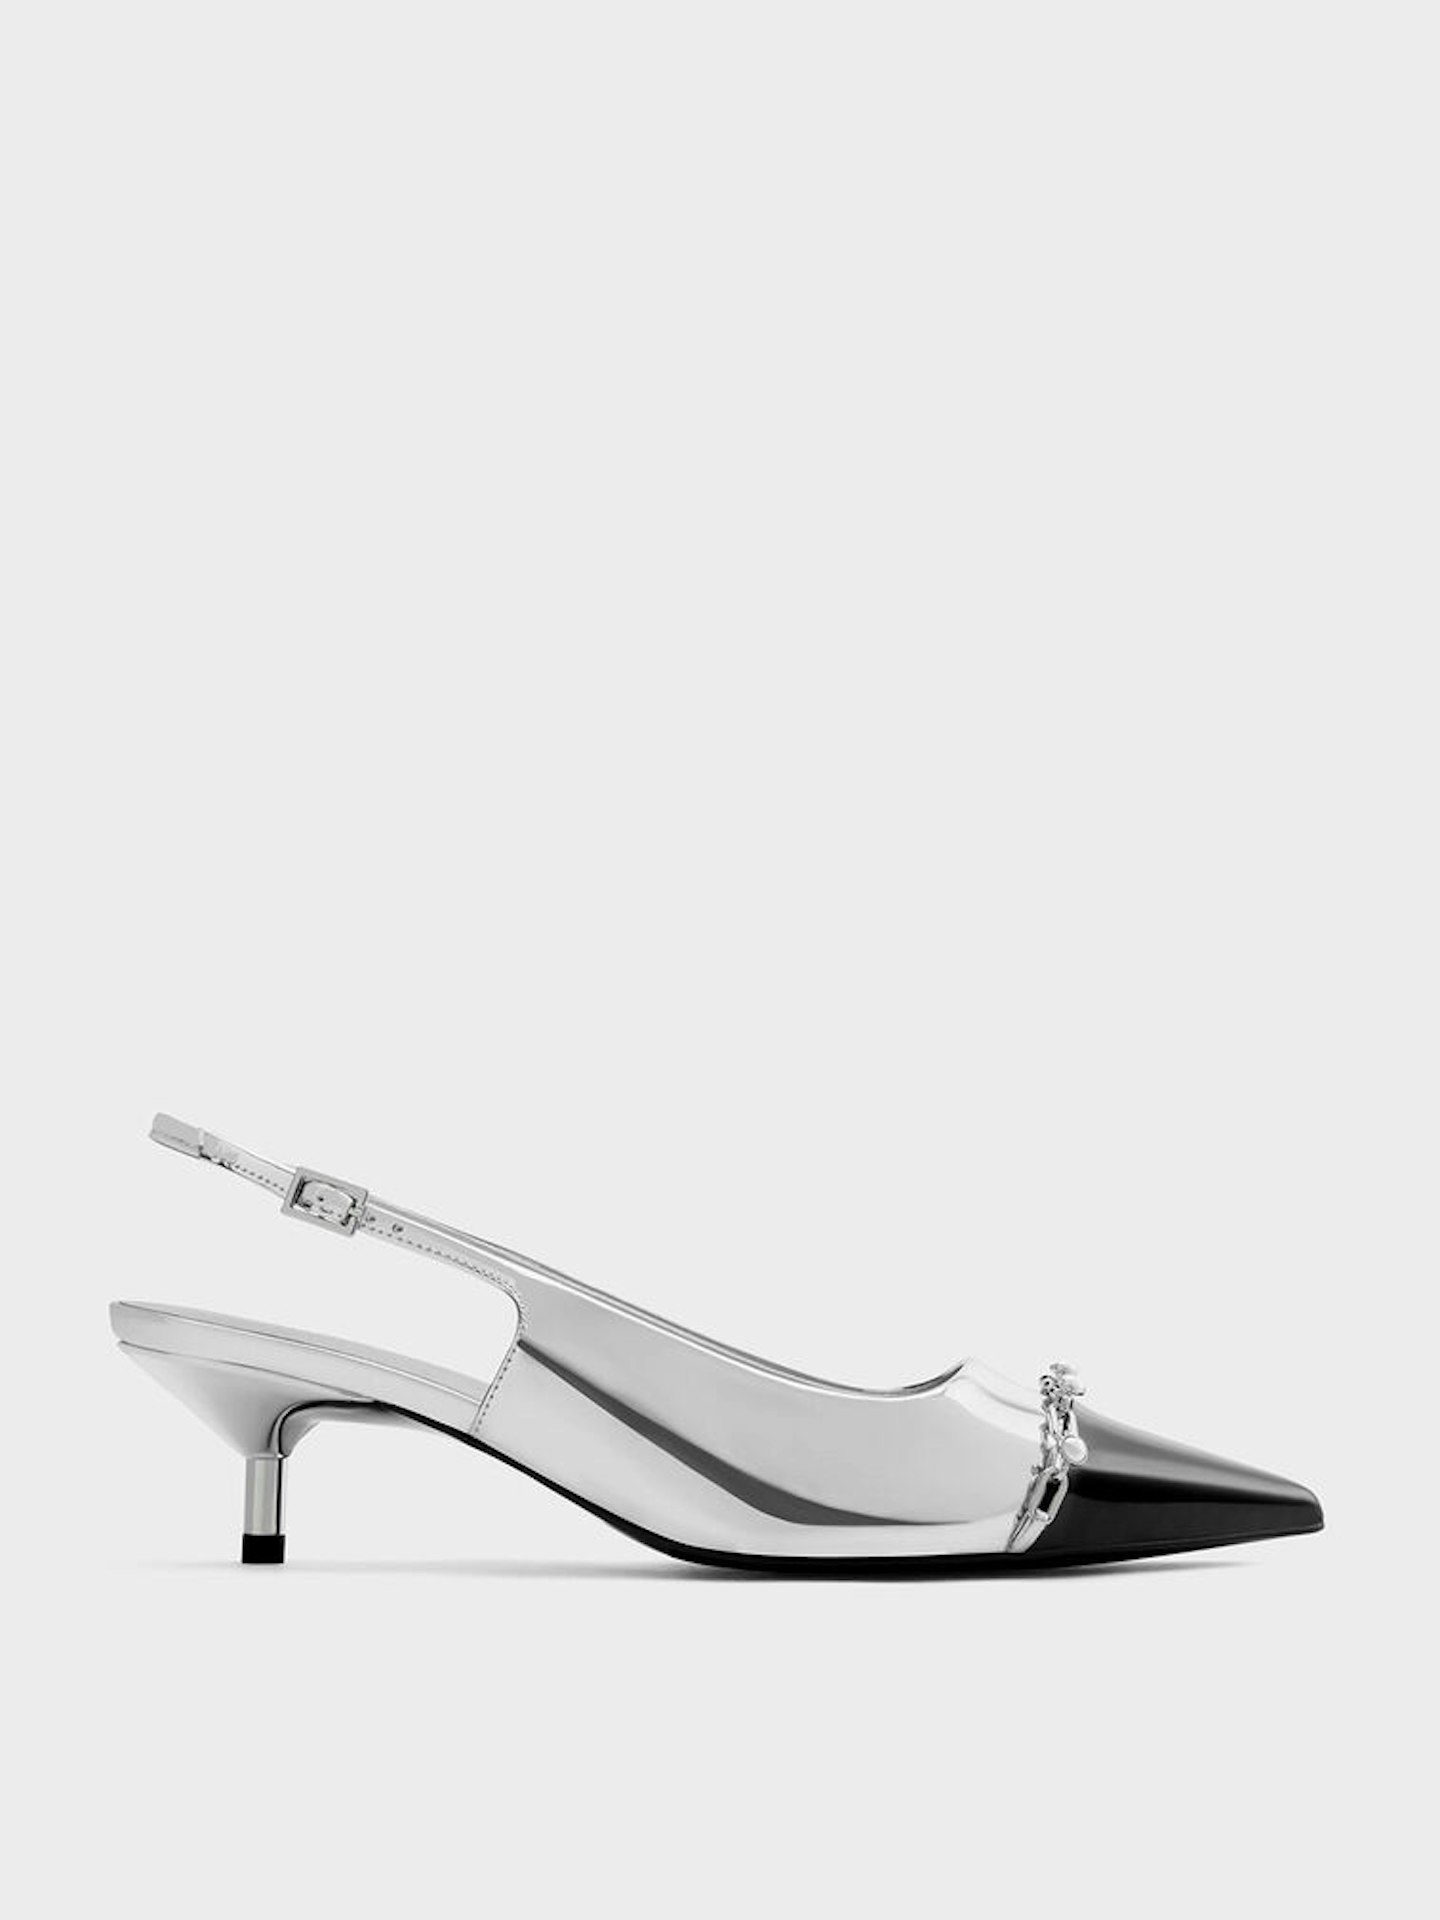 Charles & Keith, Metallic Pearl Chain-Link Silver Slingback Pumps